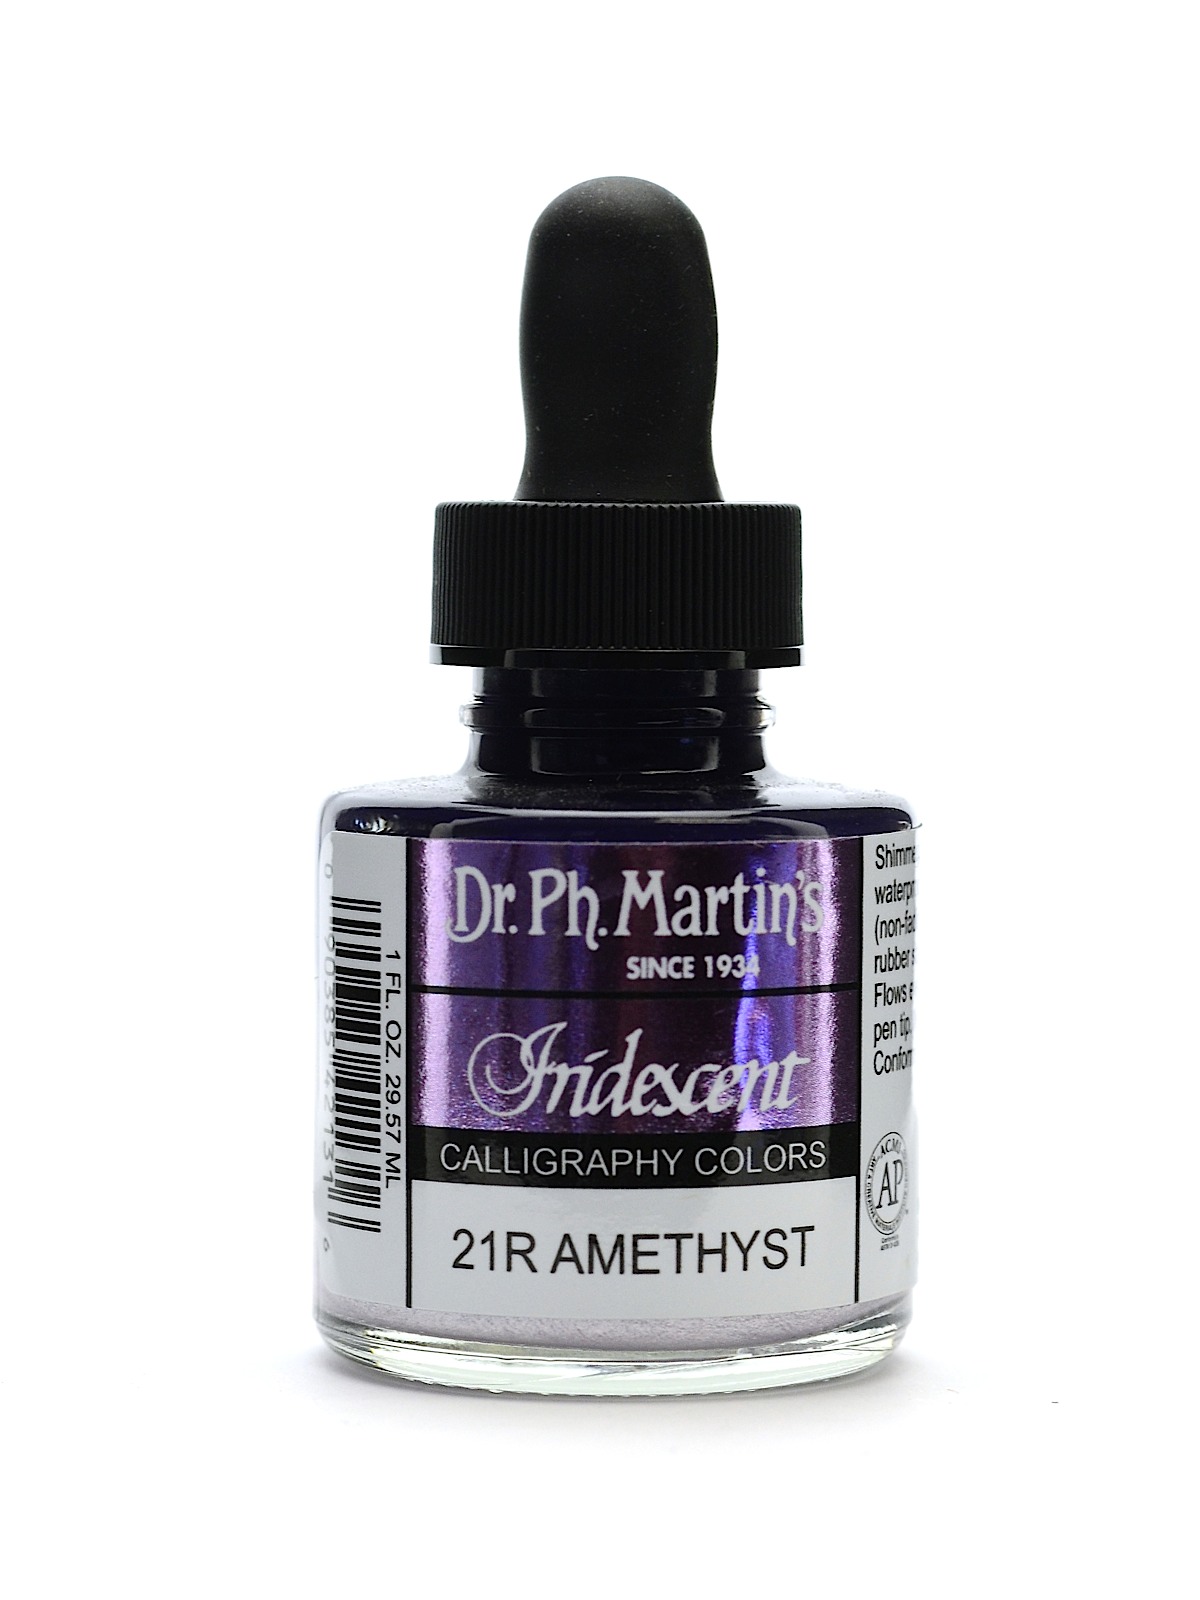 Iridescent Calligraphy Colors 1 Oz. Amethyst